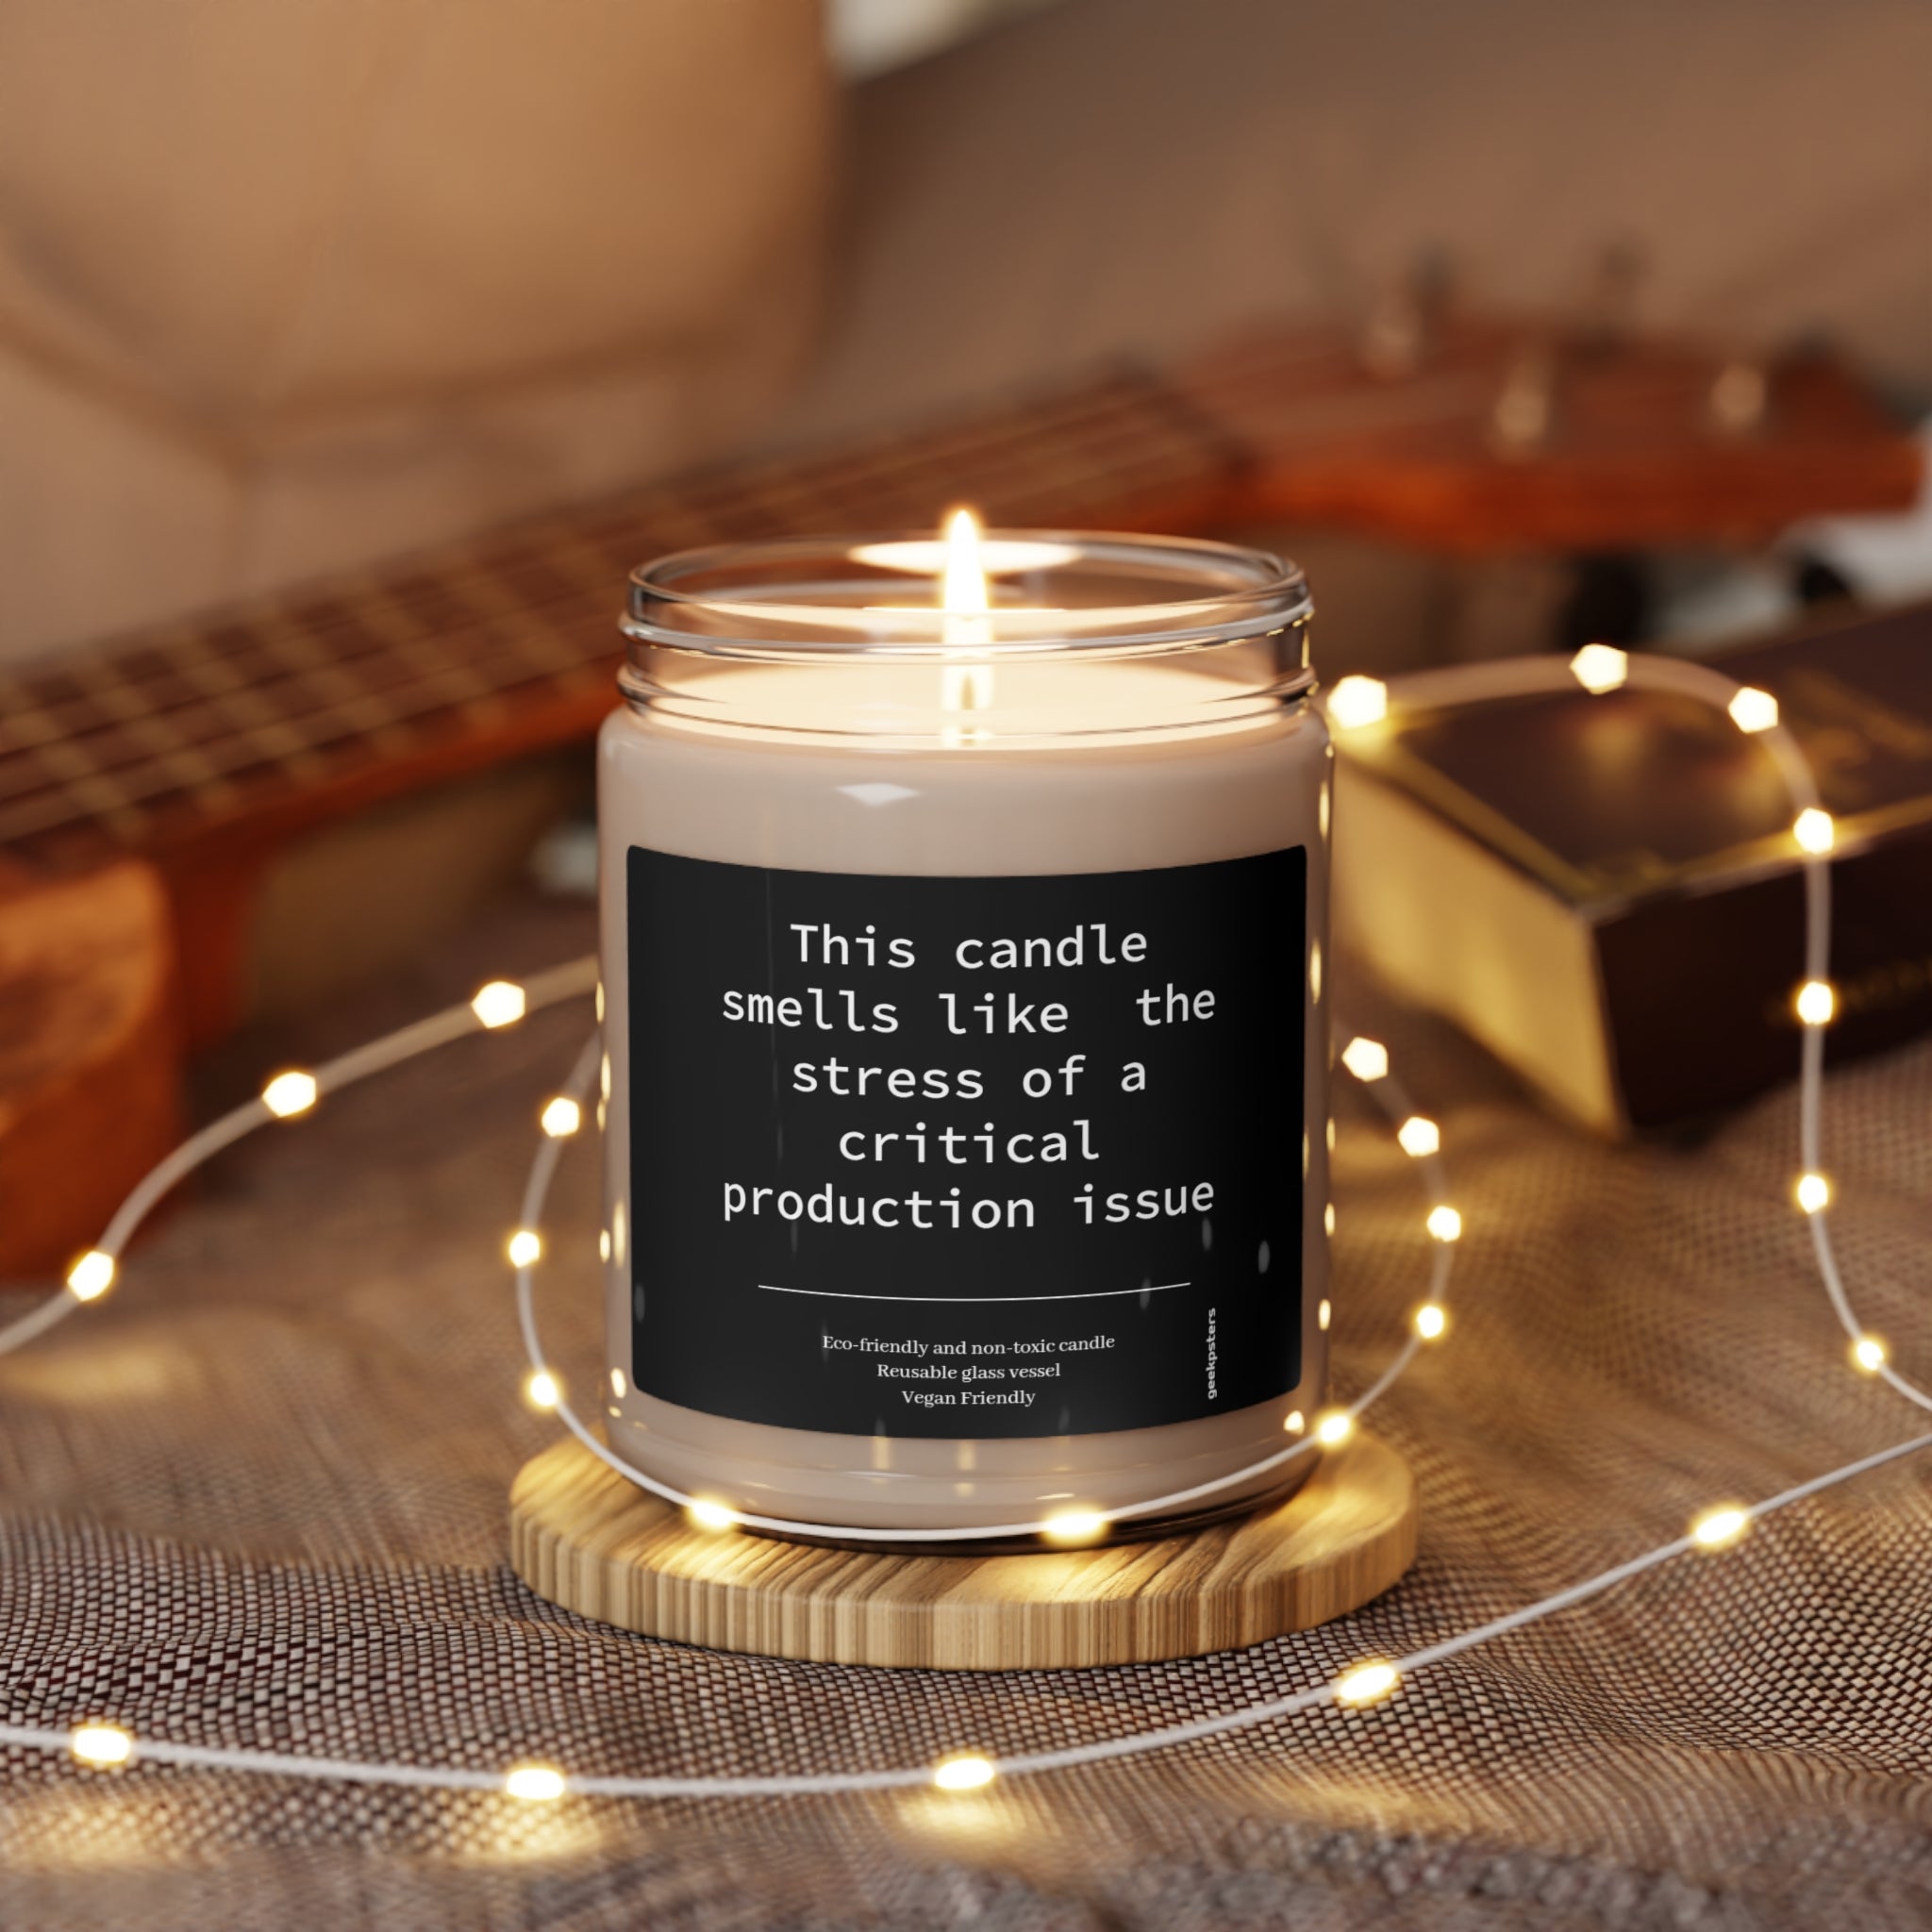 A "This Candle Smells Like the Stress of a Critical Production Issue" soy candle on a wooden holder surrounded by fairy lights.